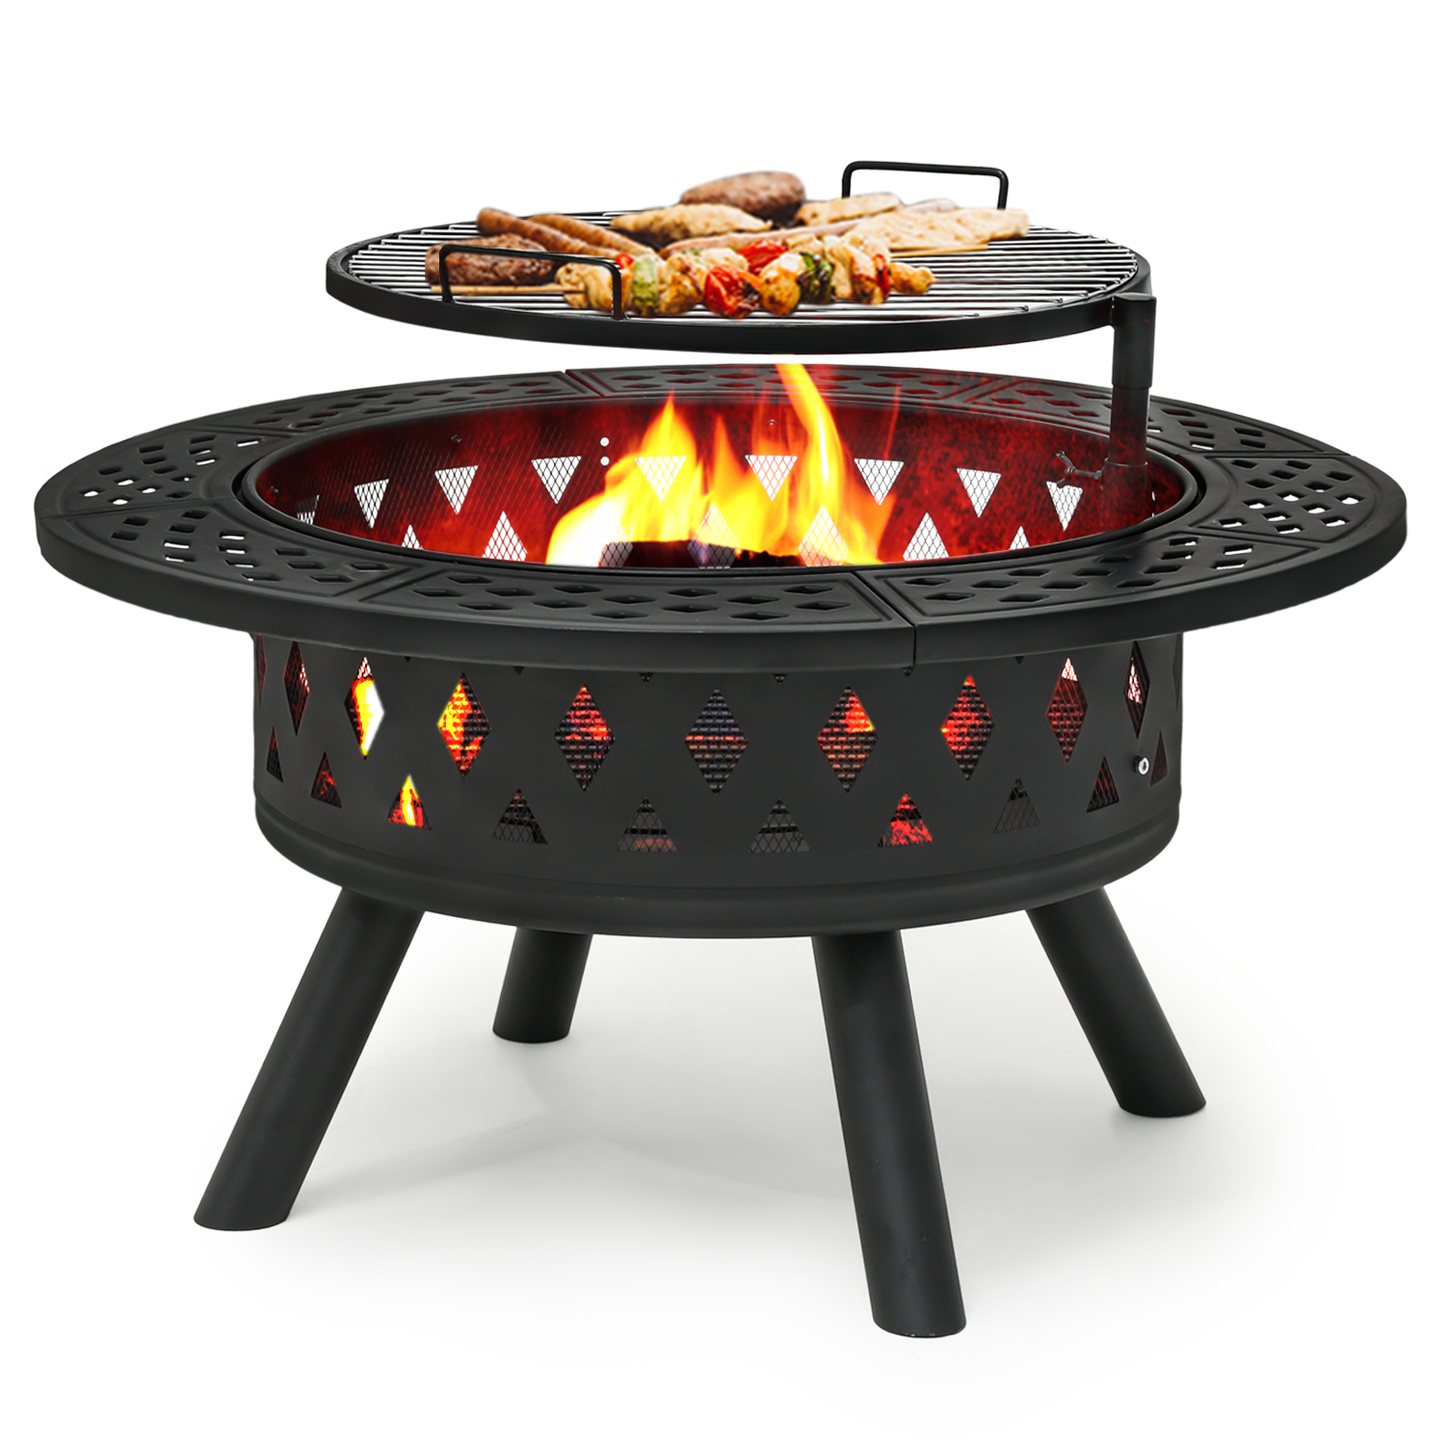 38" Round Fire Pit Table w/360° Rotatable Grill Rack